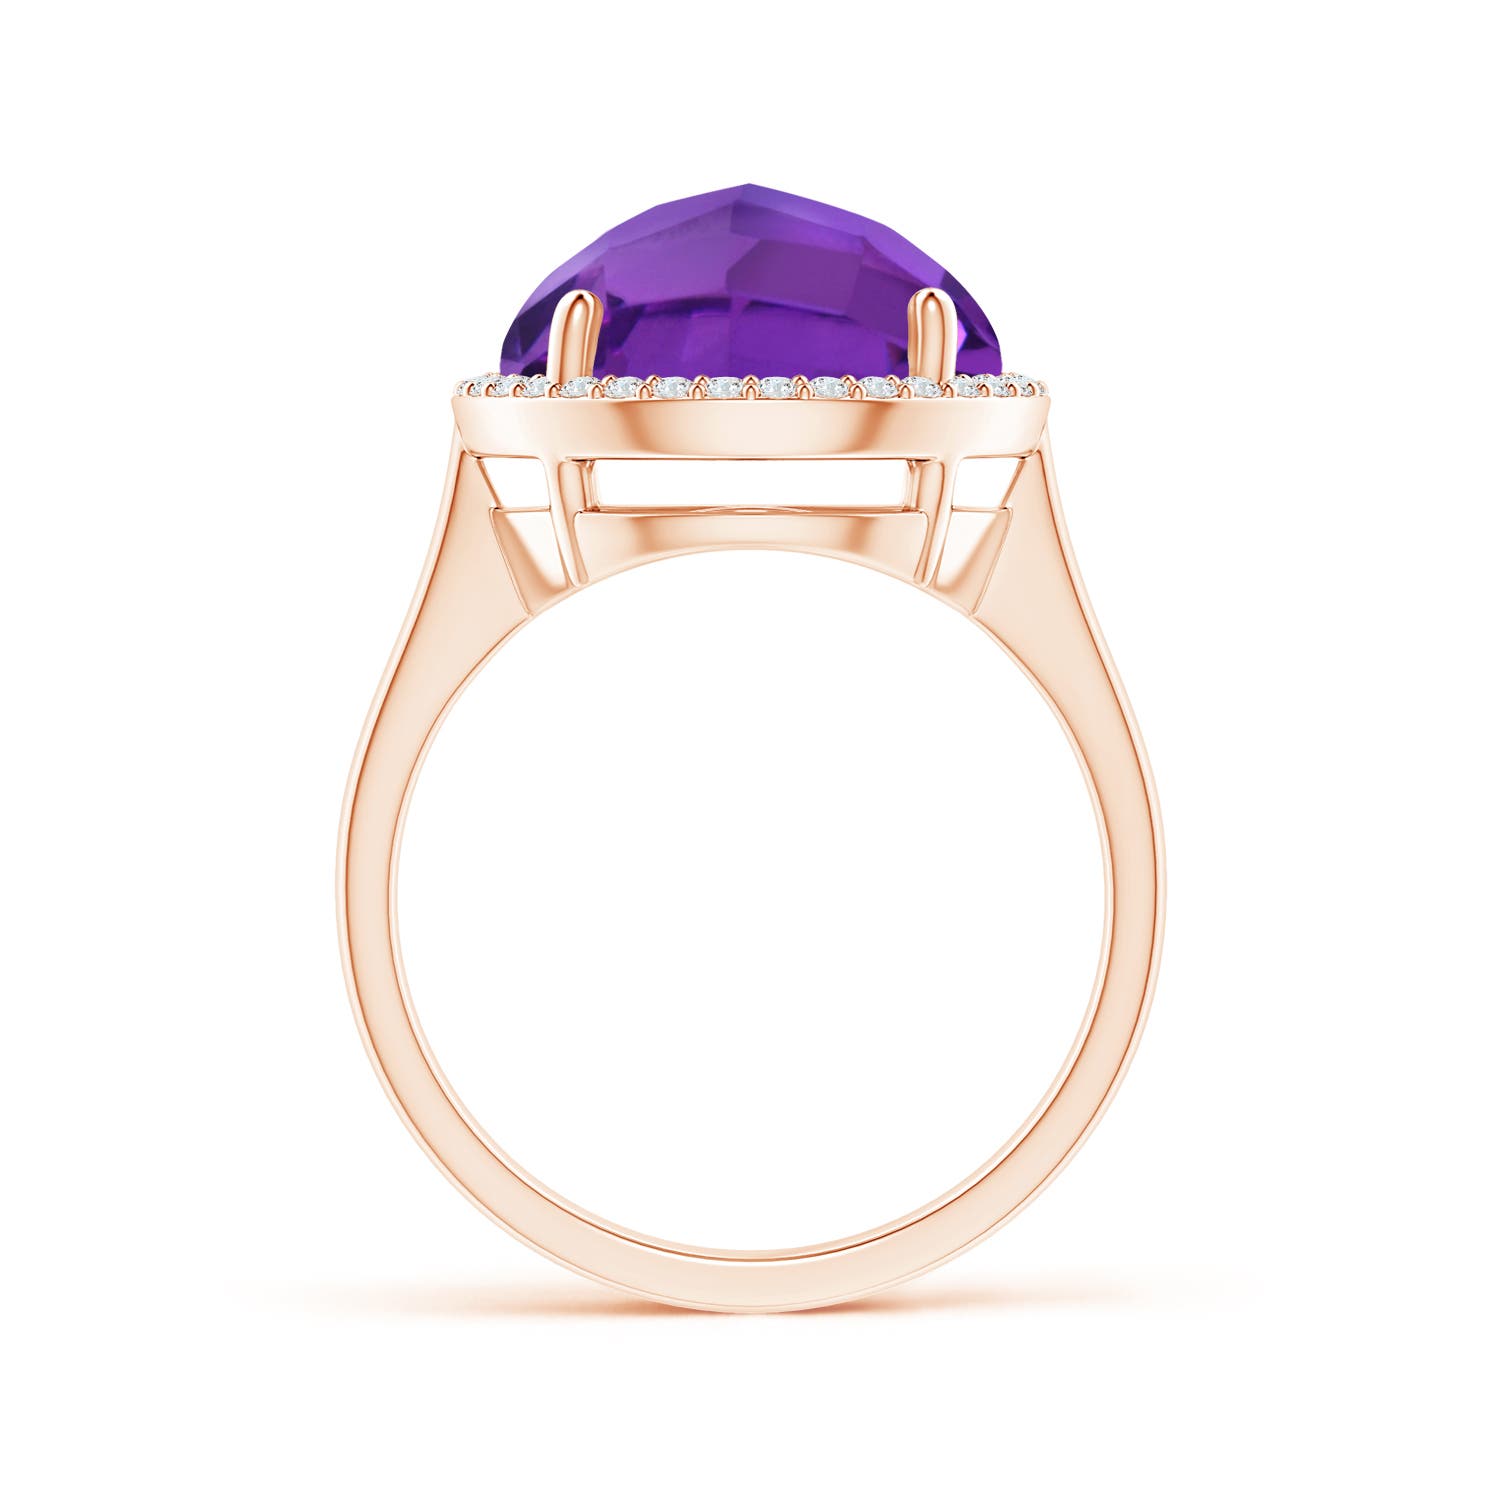 AAA - Amethyst / 5.7 CT / 14 KT Rose Gold